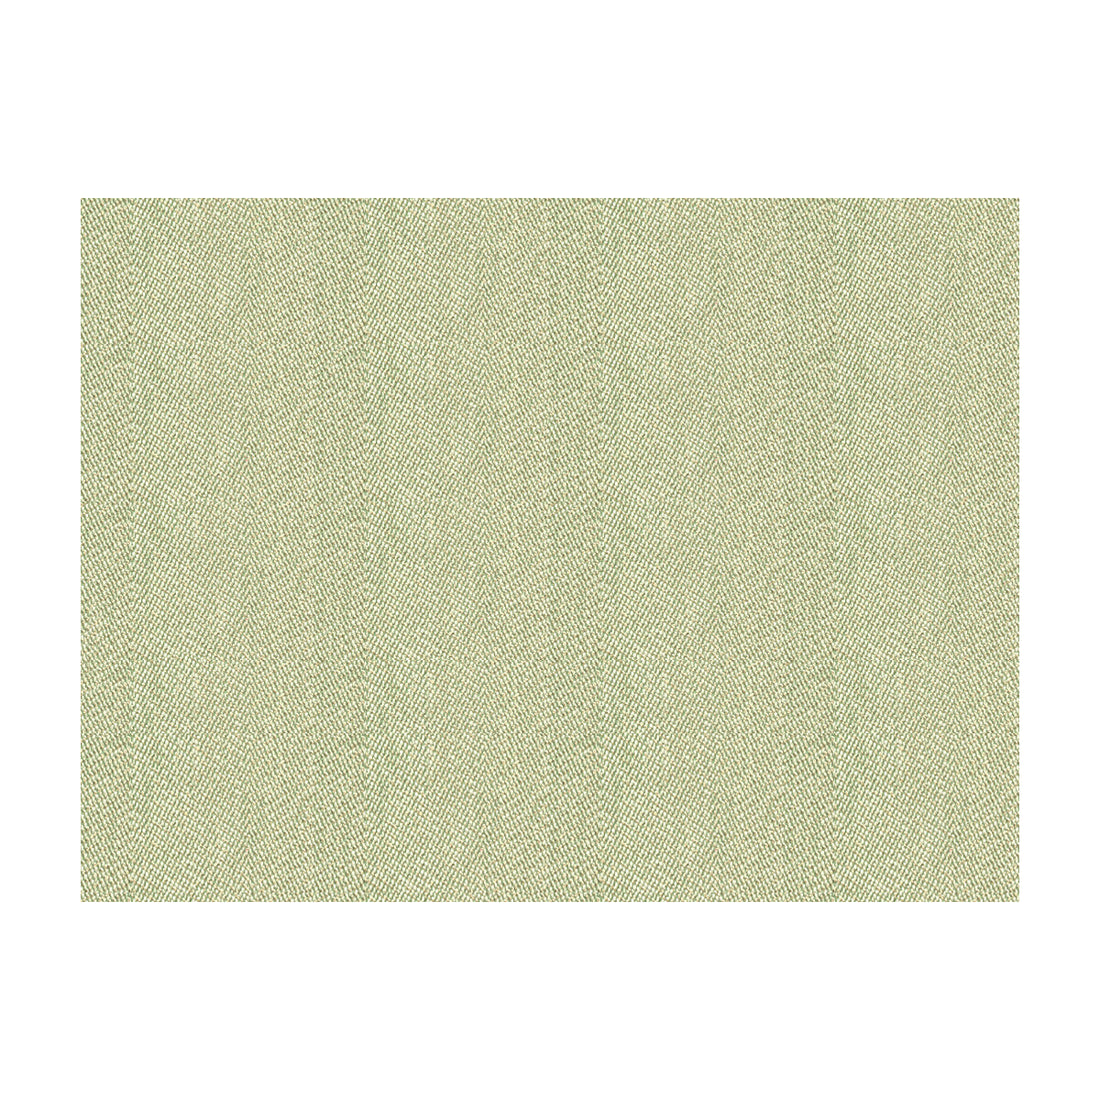 Kravet Smart fabric in 33832-23 color - pattern 33832.23.0 - by Kravet Smart in the Performance Crypton Home collection